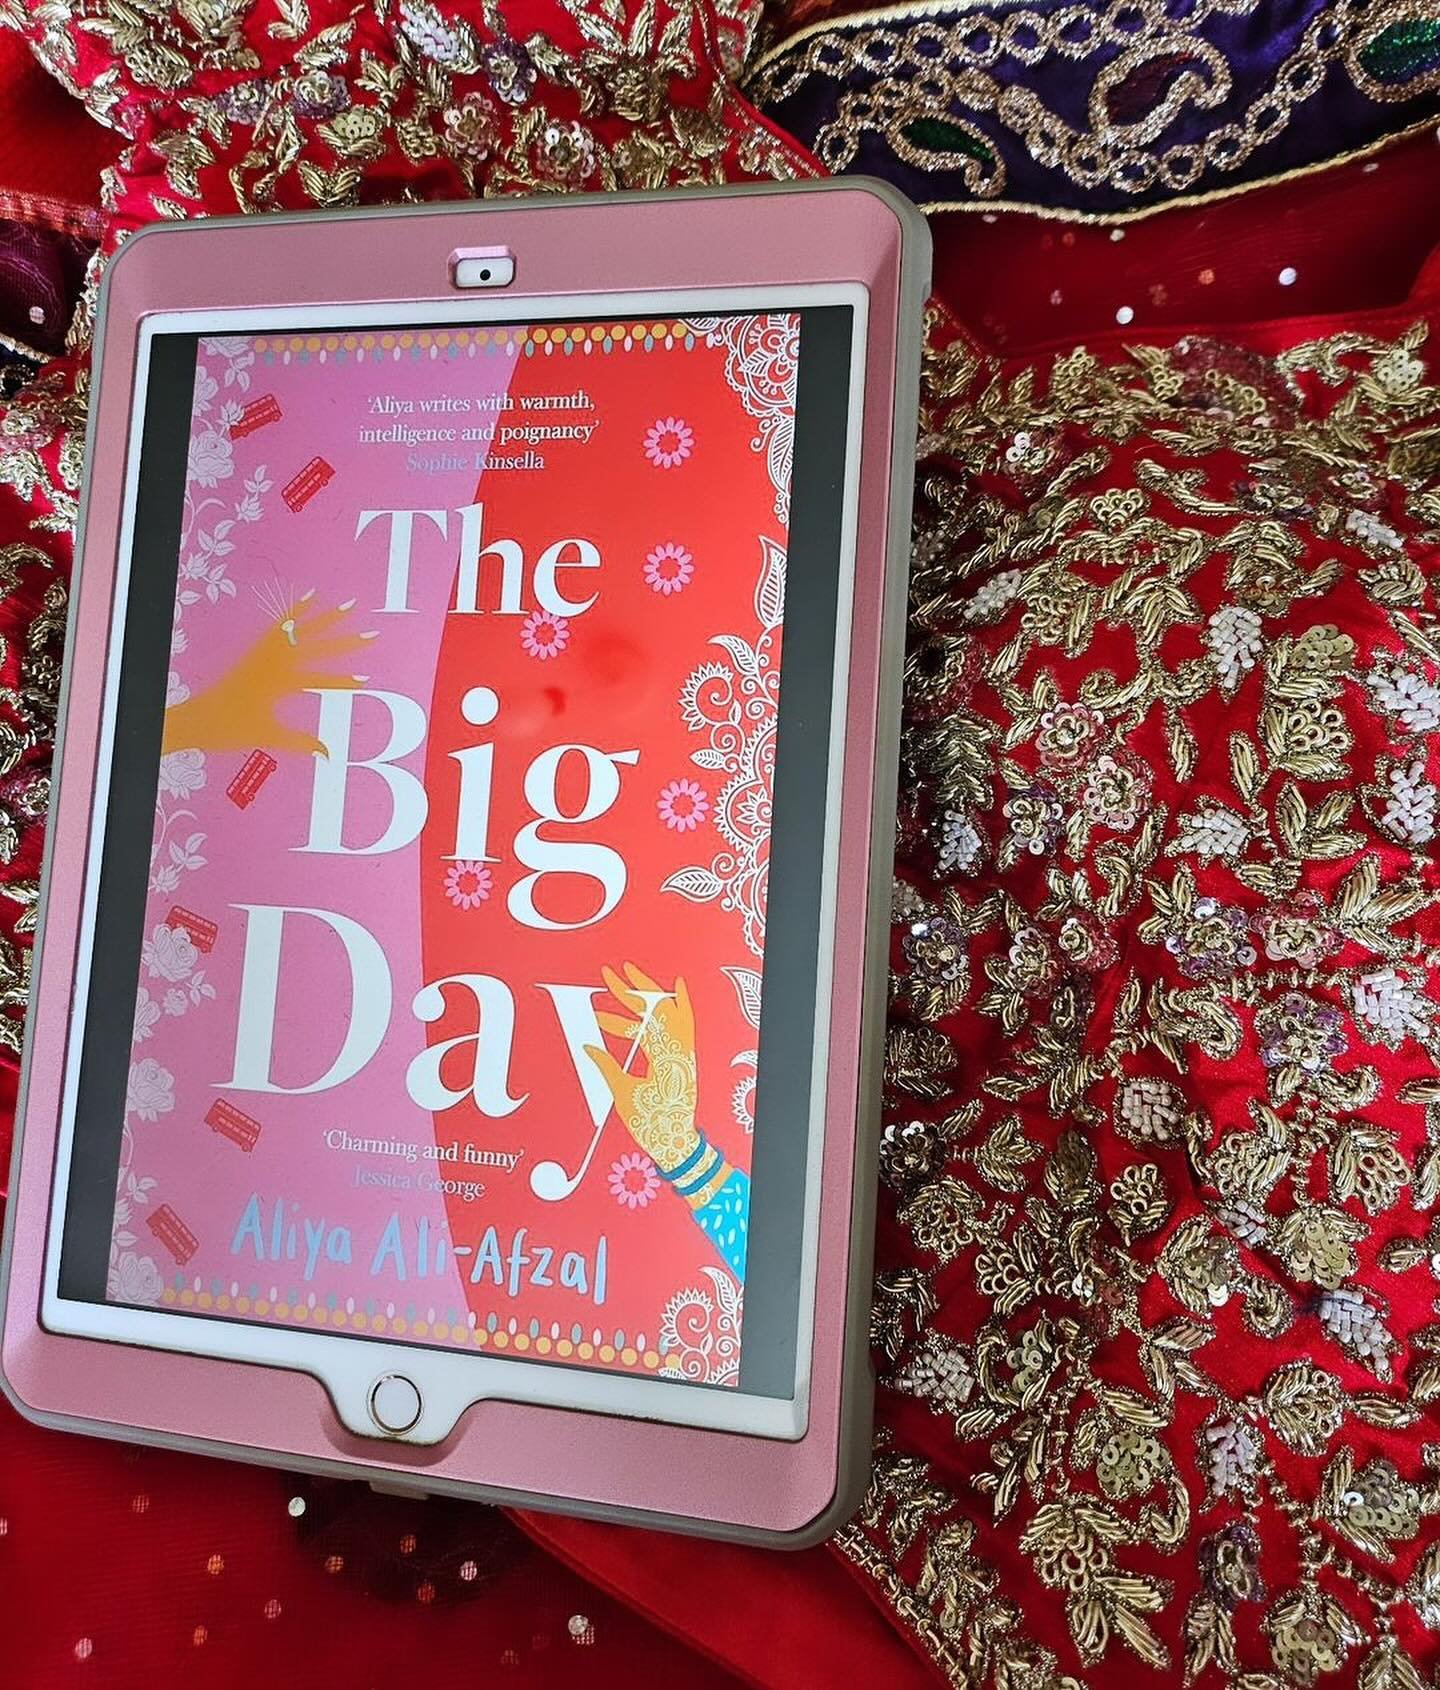 Thank you @on_nims_bookshelf ❤️ 
Book review - No spoilers 
The Big Day by Aliya Ali-Afzal
.
Noor has never been interested in marriage, even scoffed at the idea of it, no matter what the aunties say; the trauma of her parents divorce has still has a